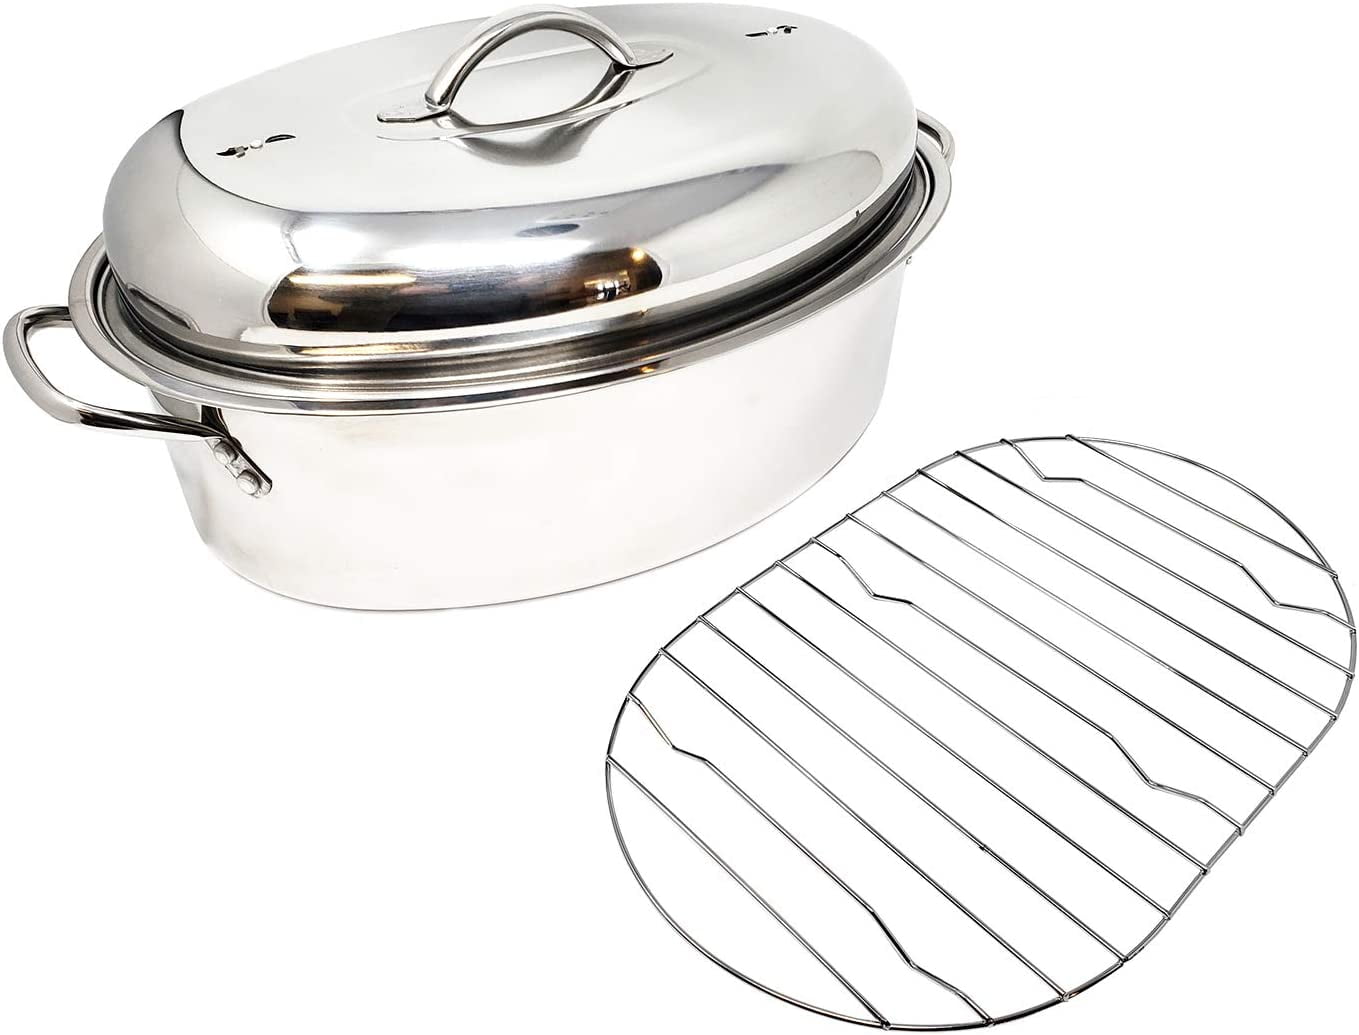 14-Quart black Mainstays 20-Pound Turkey Roaster with High-Dome Lid Black by Mainstay 